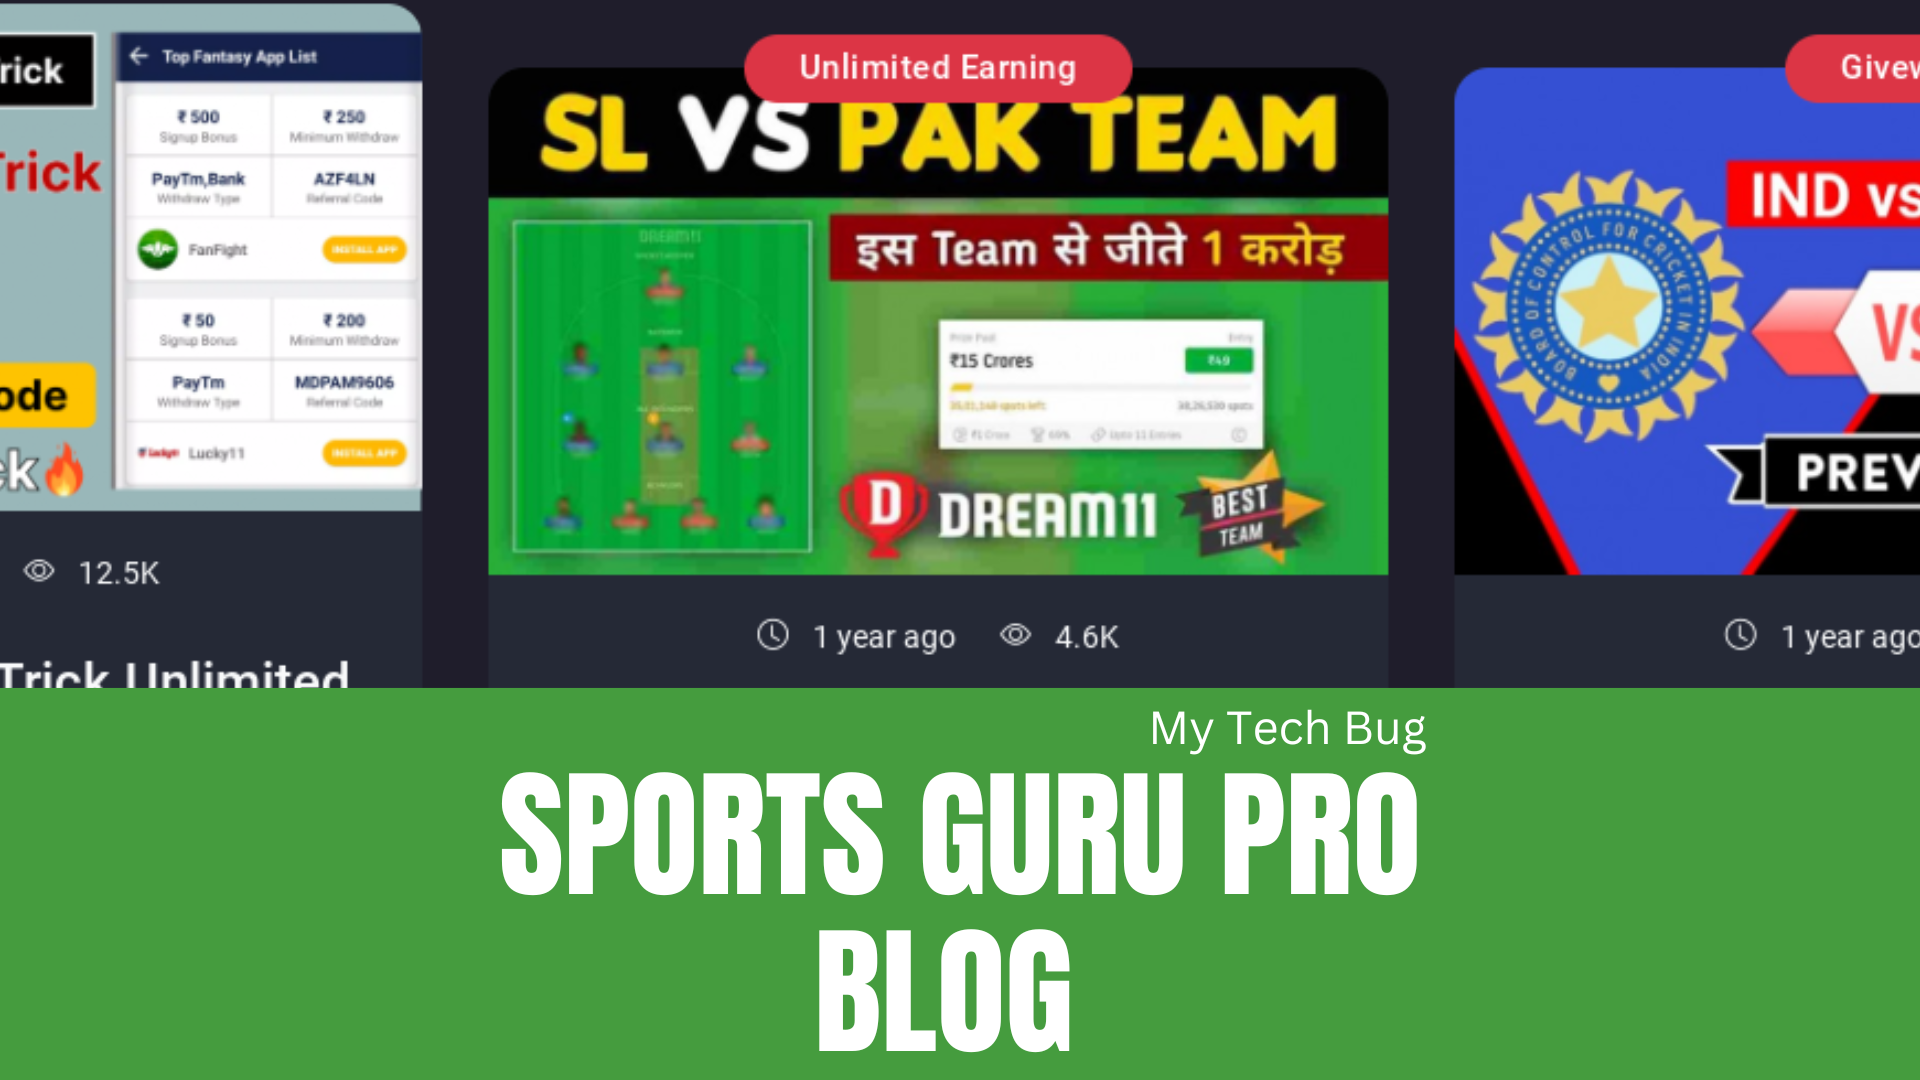 Sports Guru Pro Blogs: An online blog site for sports enthusiasts